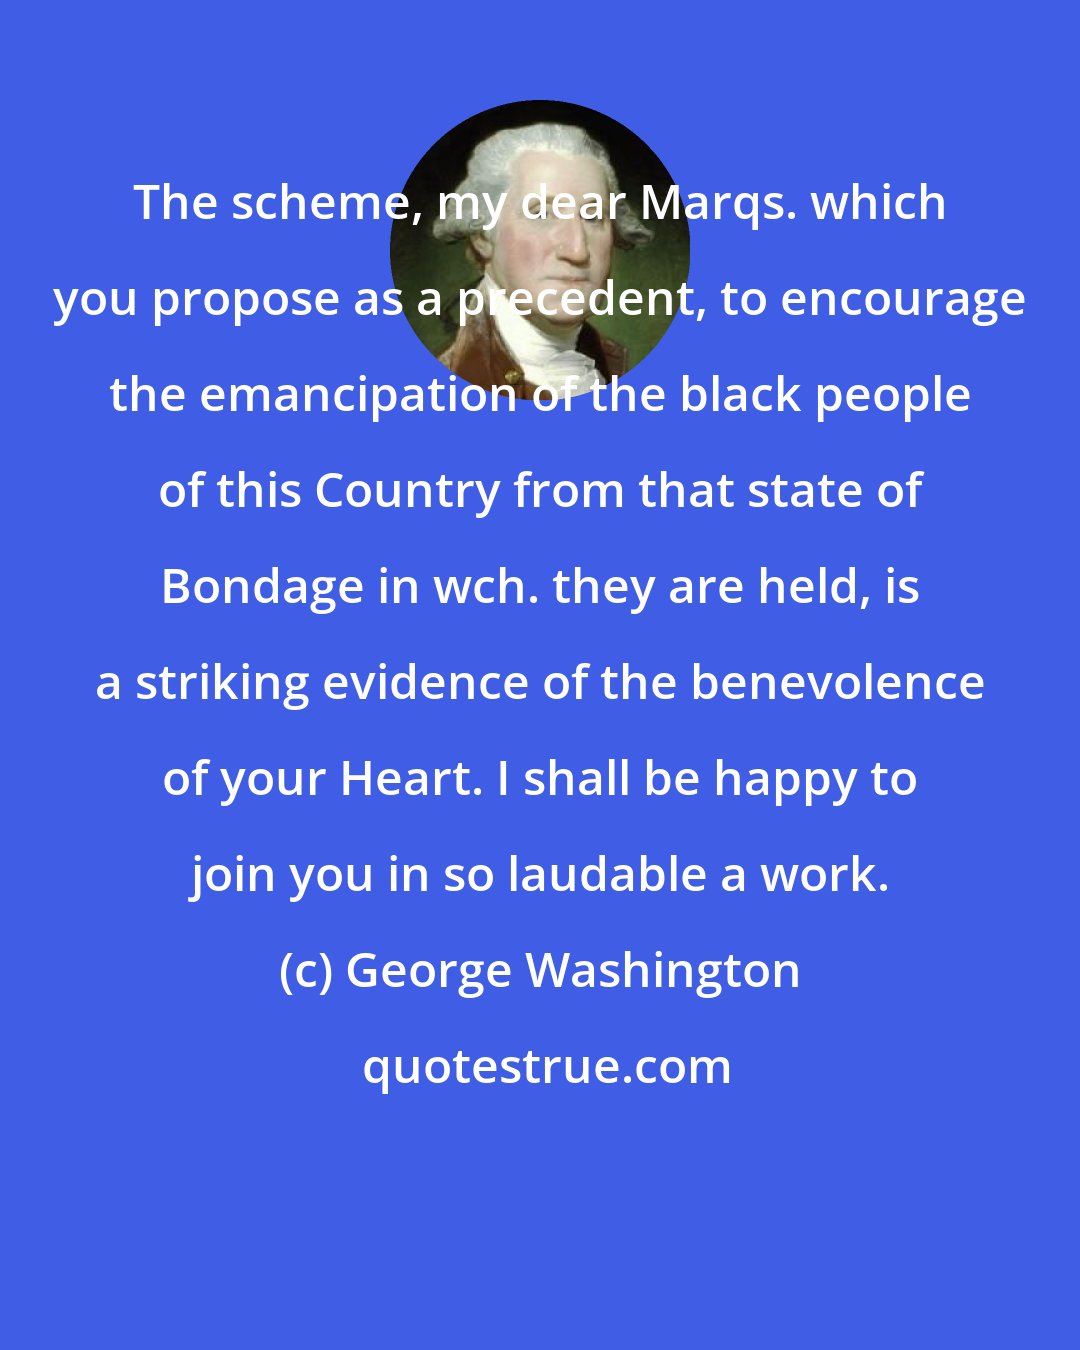 George Washington: The scheme, my dear Marqs. which you propose as a precedent, to encourage the emancipation of the black people of this Country from that state of Bondage in wch. they are held, is a striking evidence of the benevolence of your Heart. I shall be happy to join you in so laudable a work.